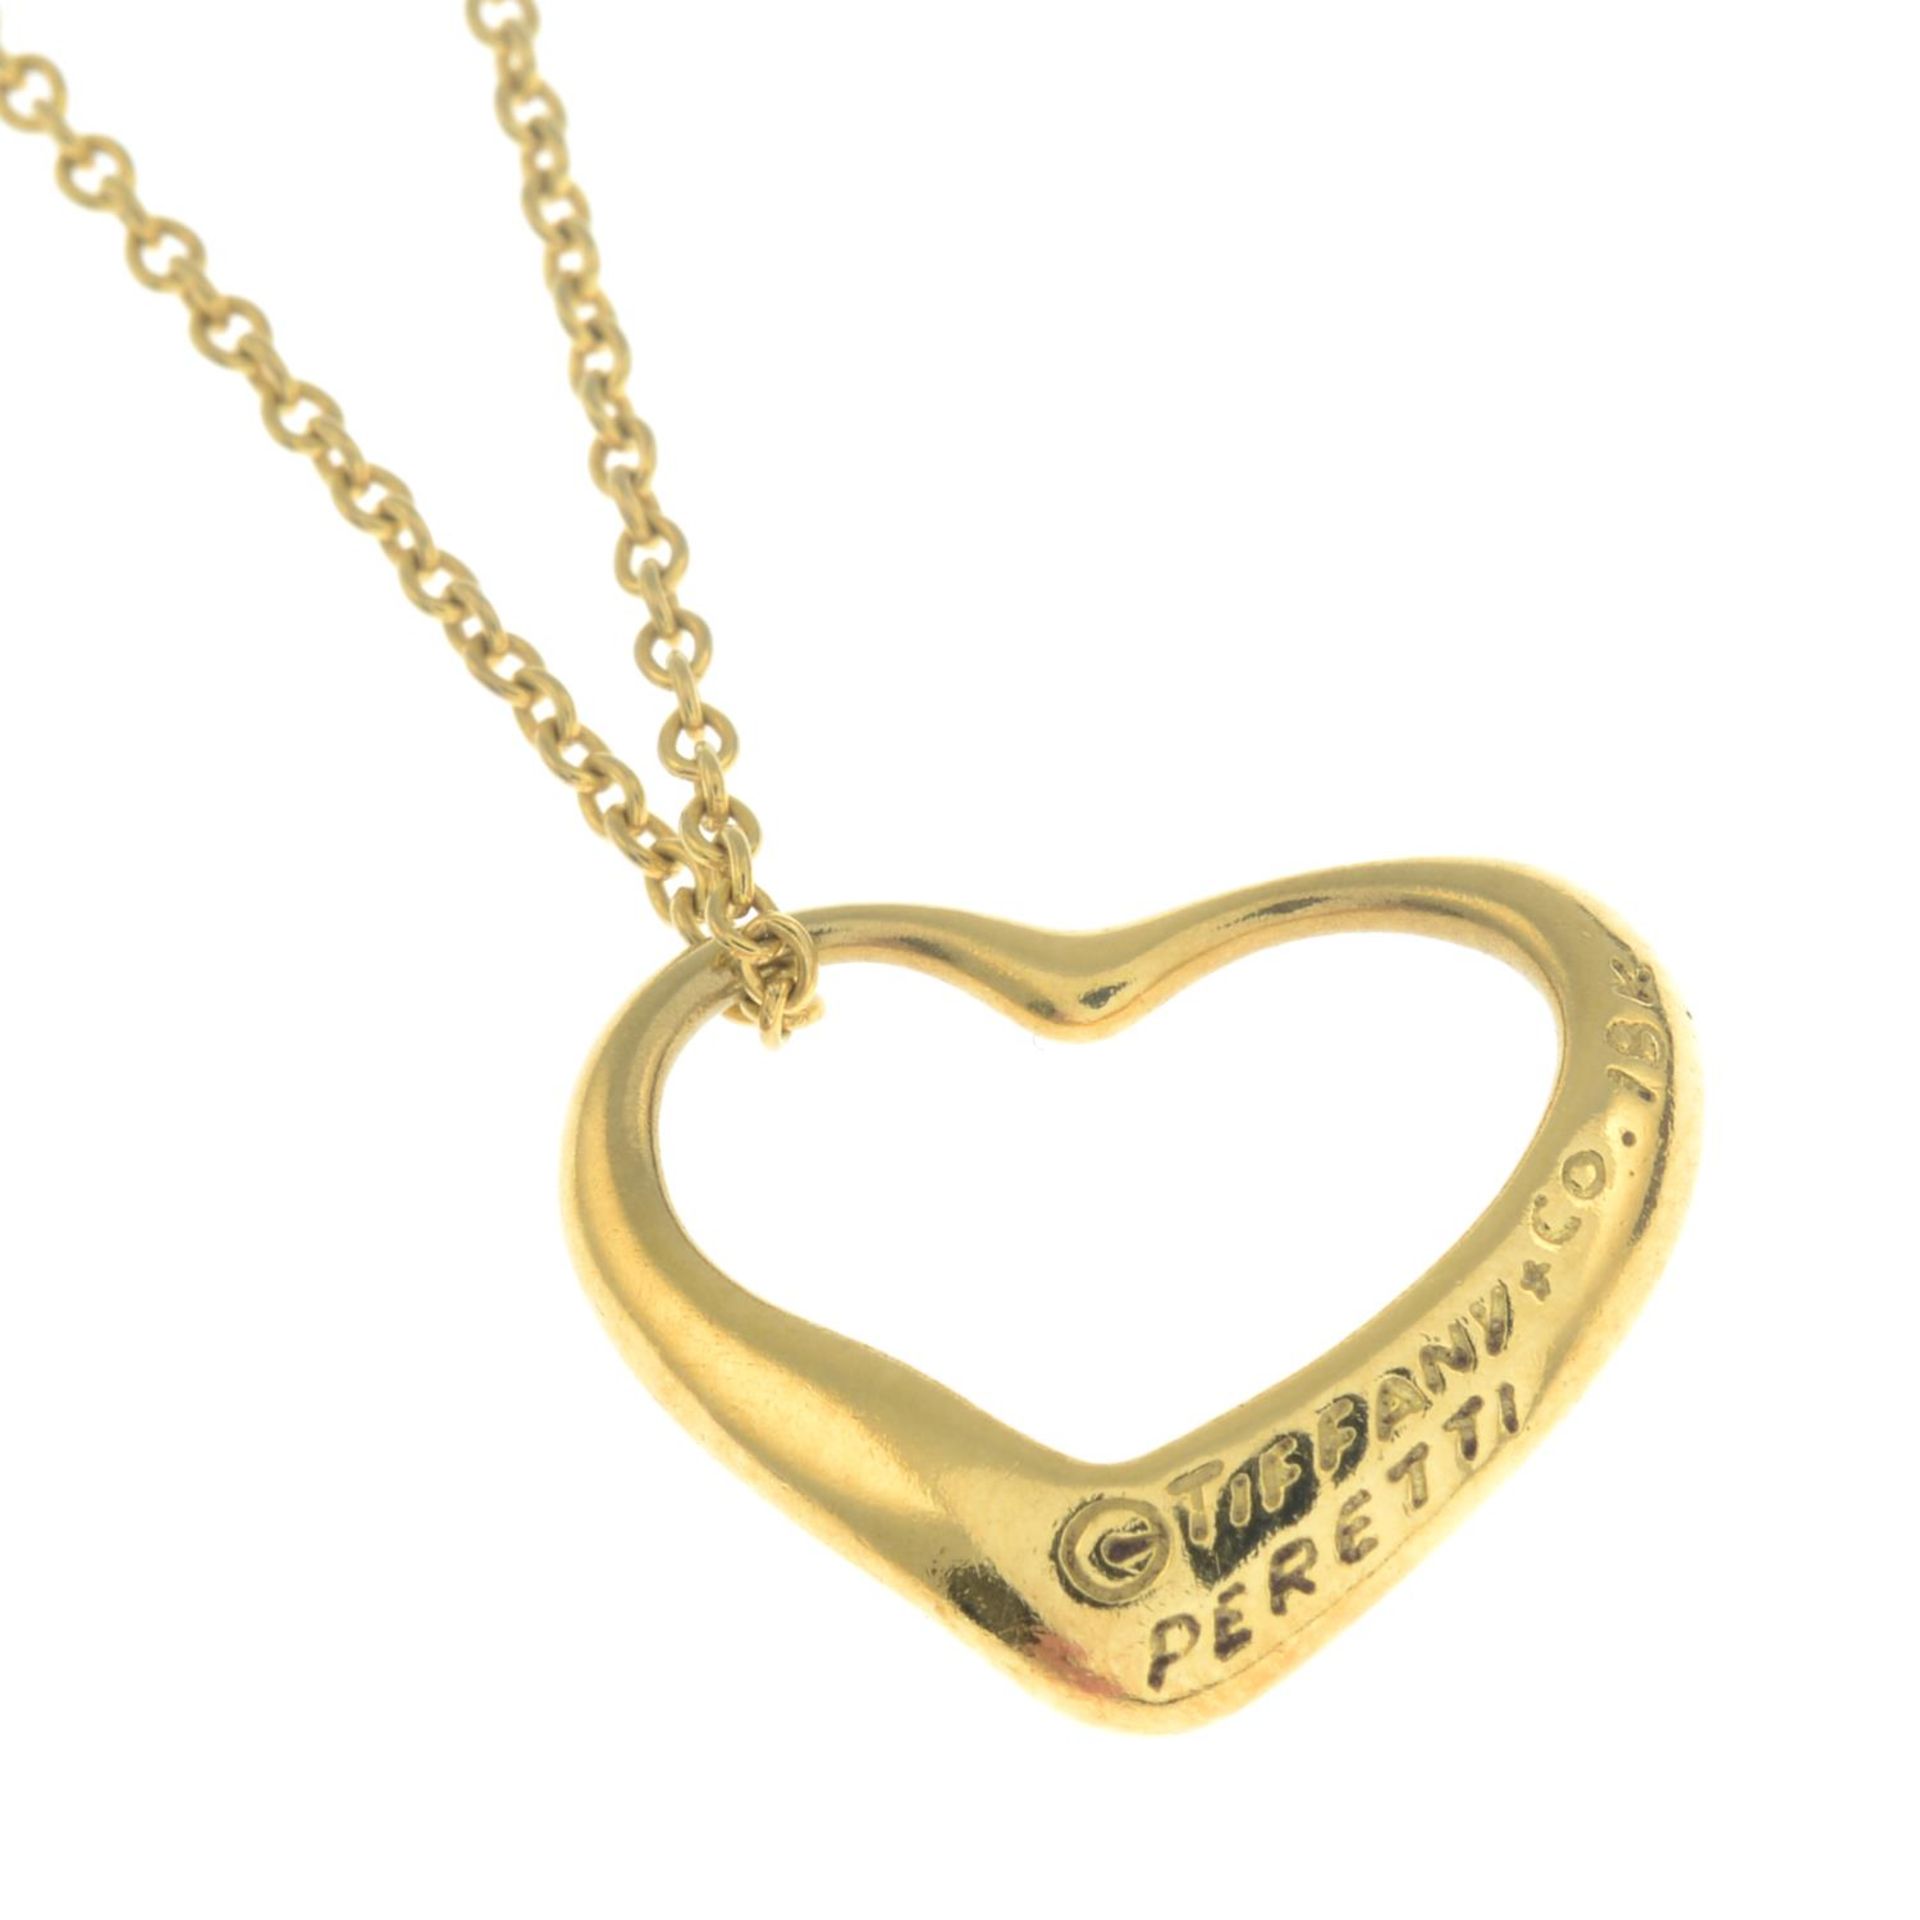 An 'Open Heart' pendant with chain, by Elsa Peretti for Tiffany & Co.Signed Tiffany & Co. - Image 2 of 3